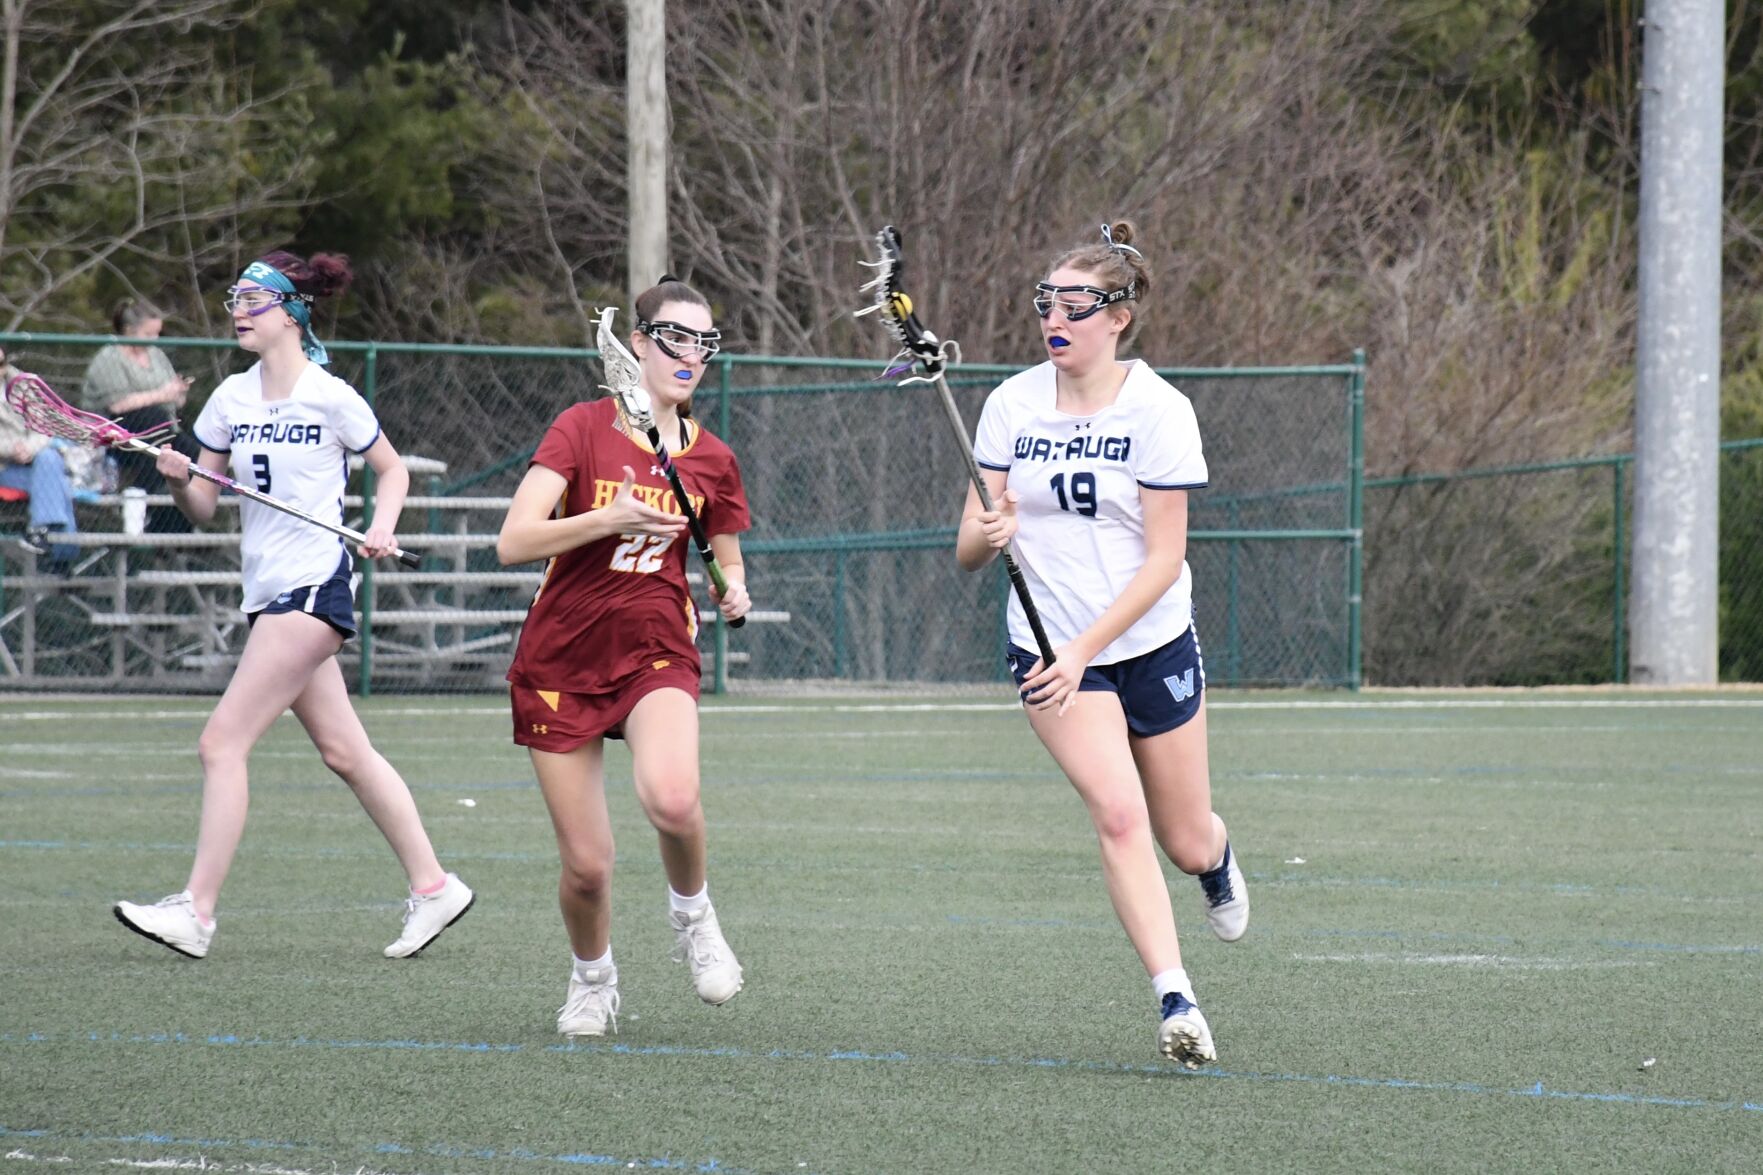 Watauga girls lacrosse falls to Hickory, St. Stephens in close games